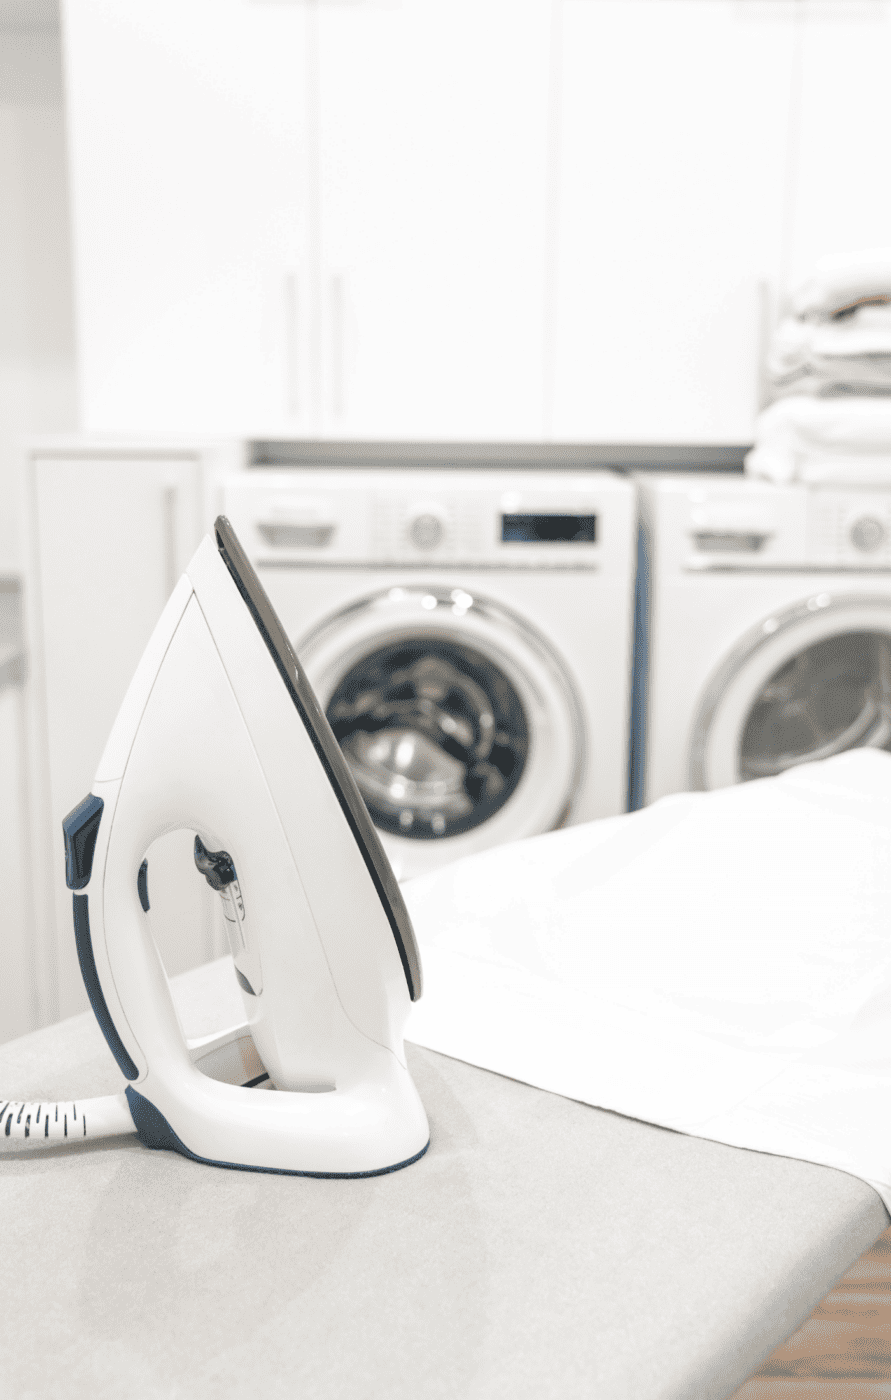 A close up photo of an ironing board and iron in a white laundry room.